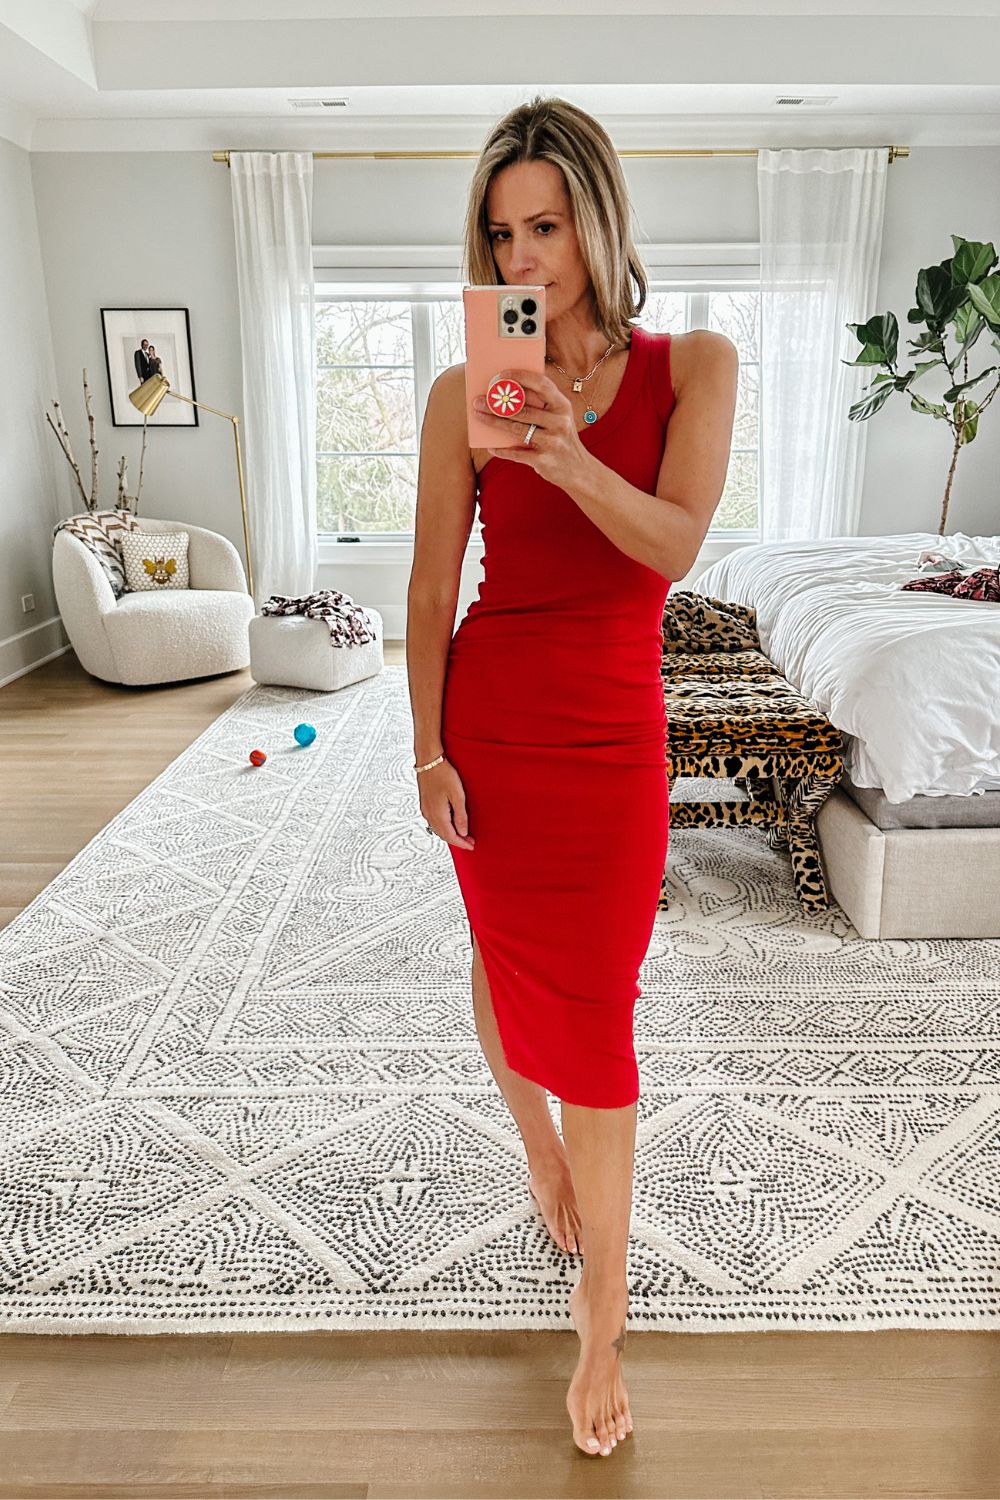 Suzanne wearing a one shoulder ribbed dress